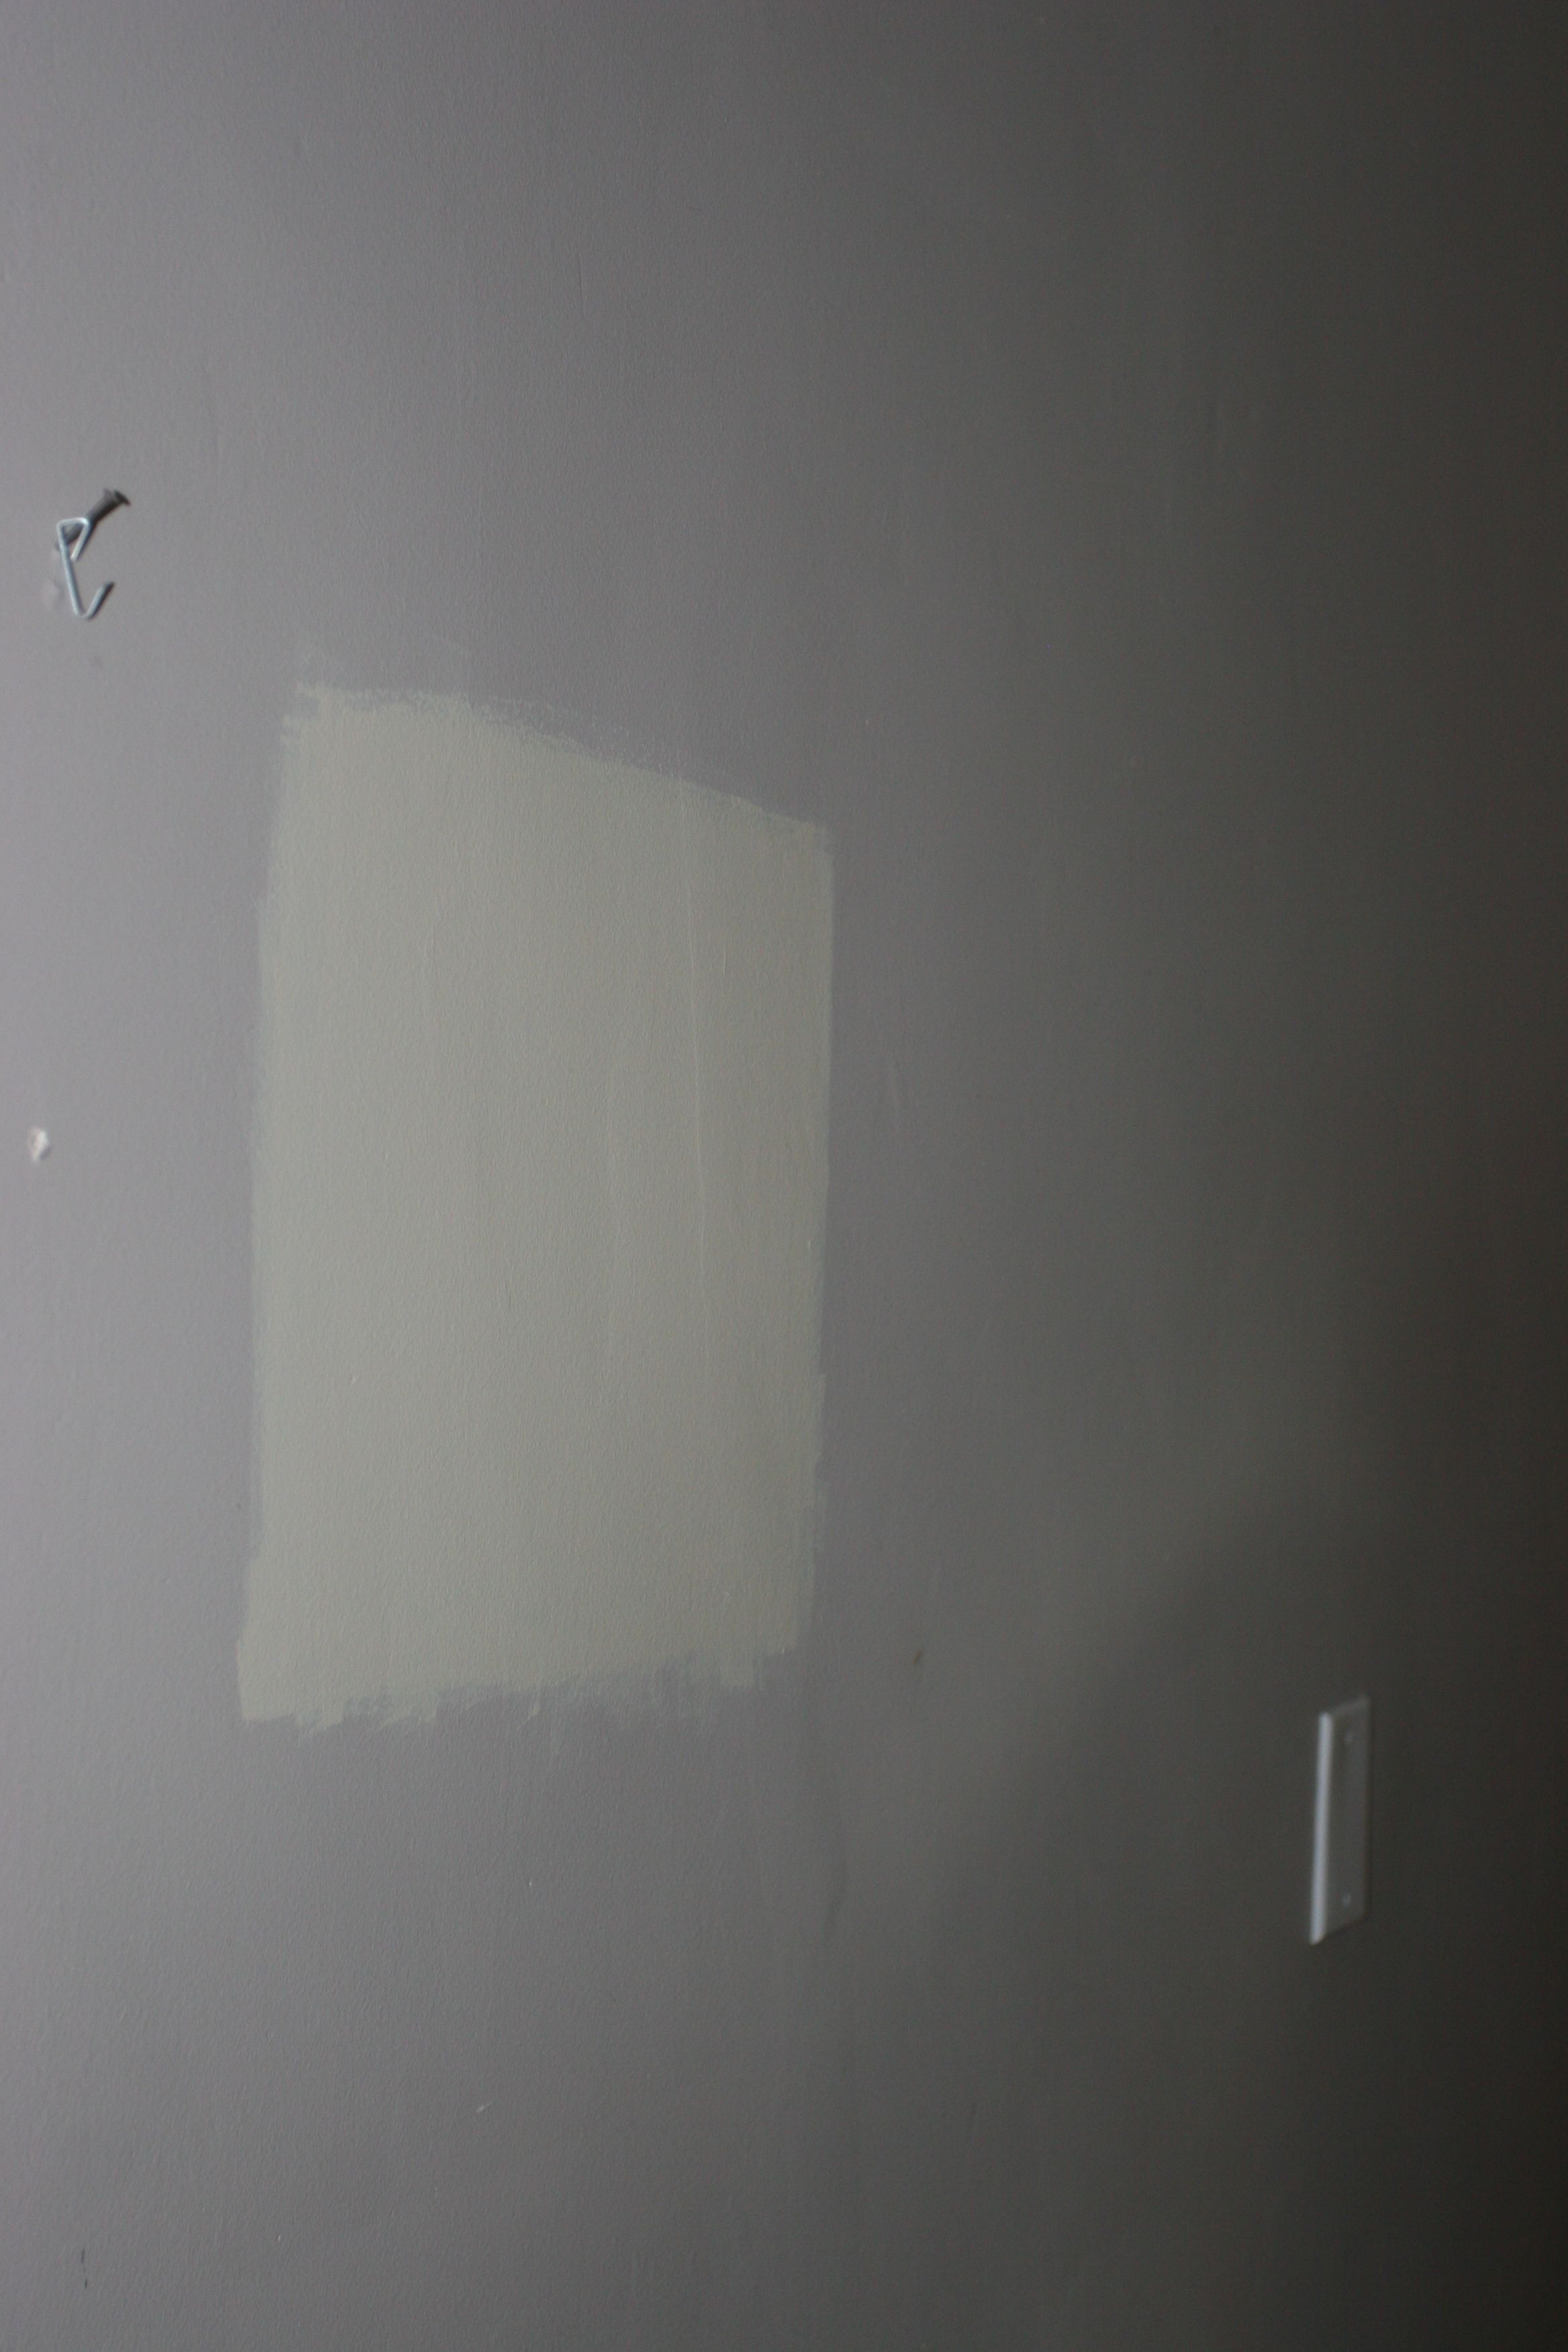 Preview paint sample for the master bath and bedroom: Benjamin Moore Aura in Hush.